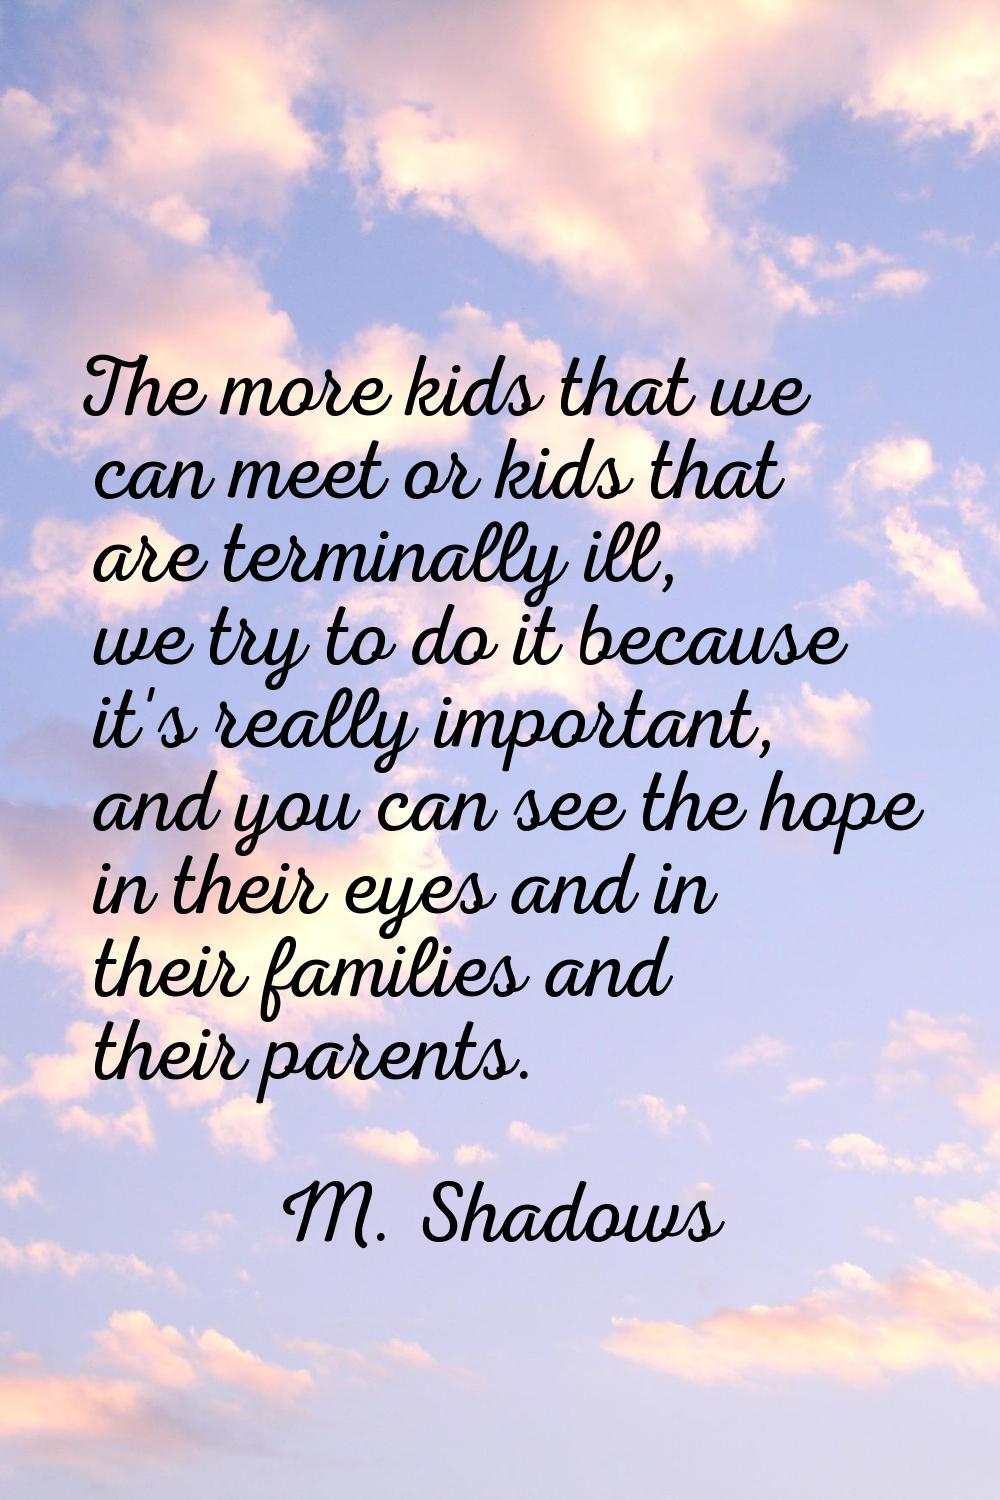 The more kids that we can meet or kids that are terminally ill, we try to do it because it's really